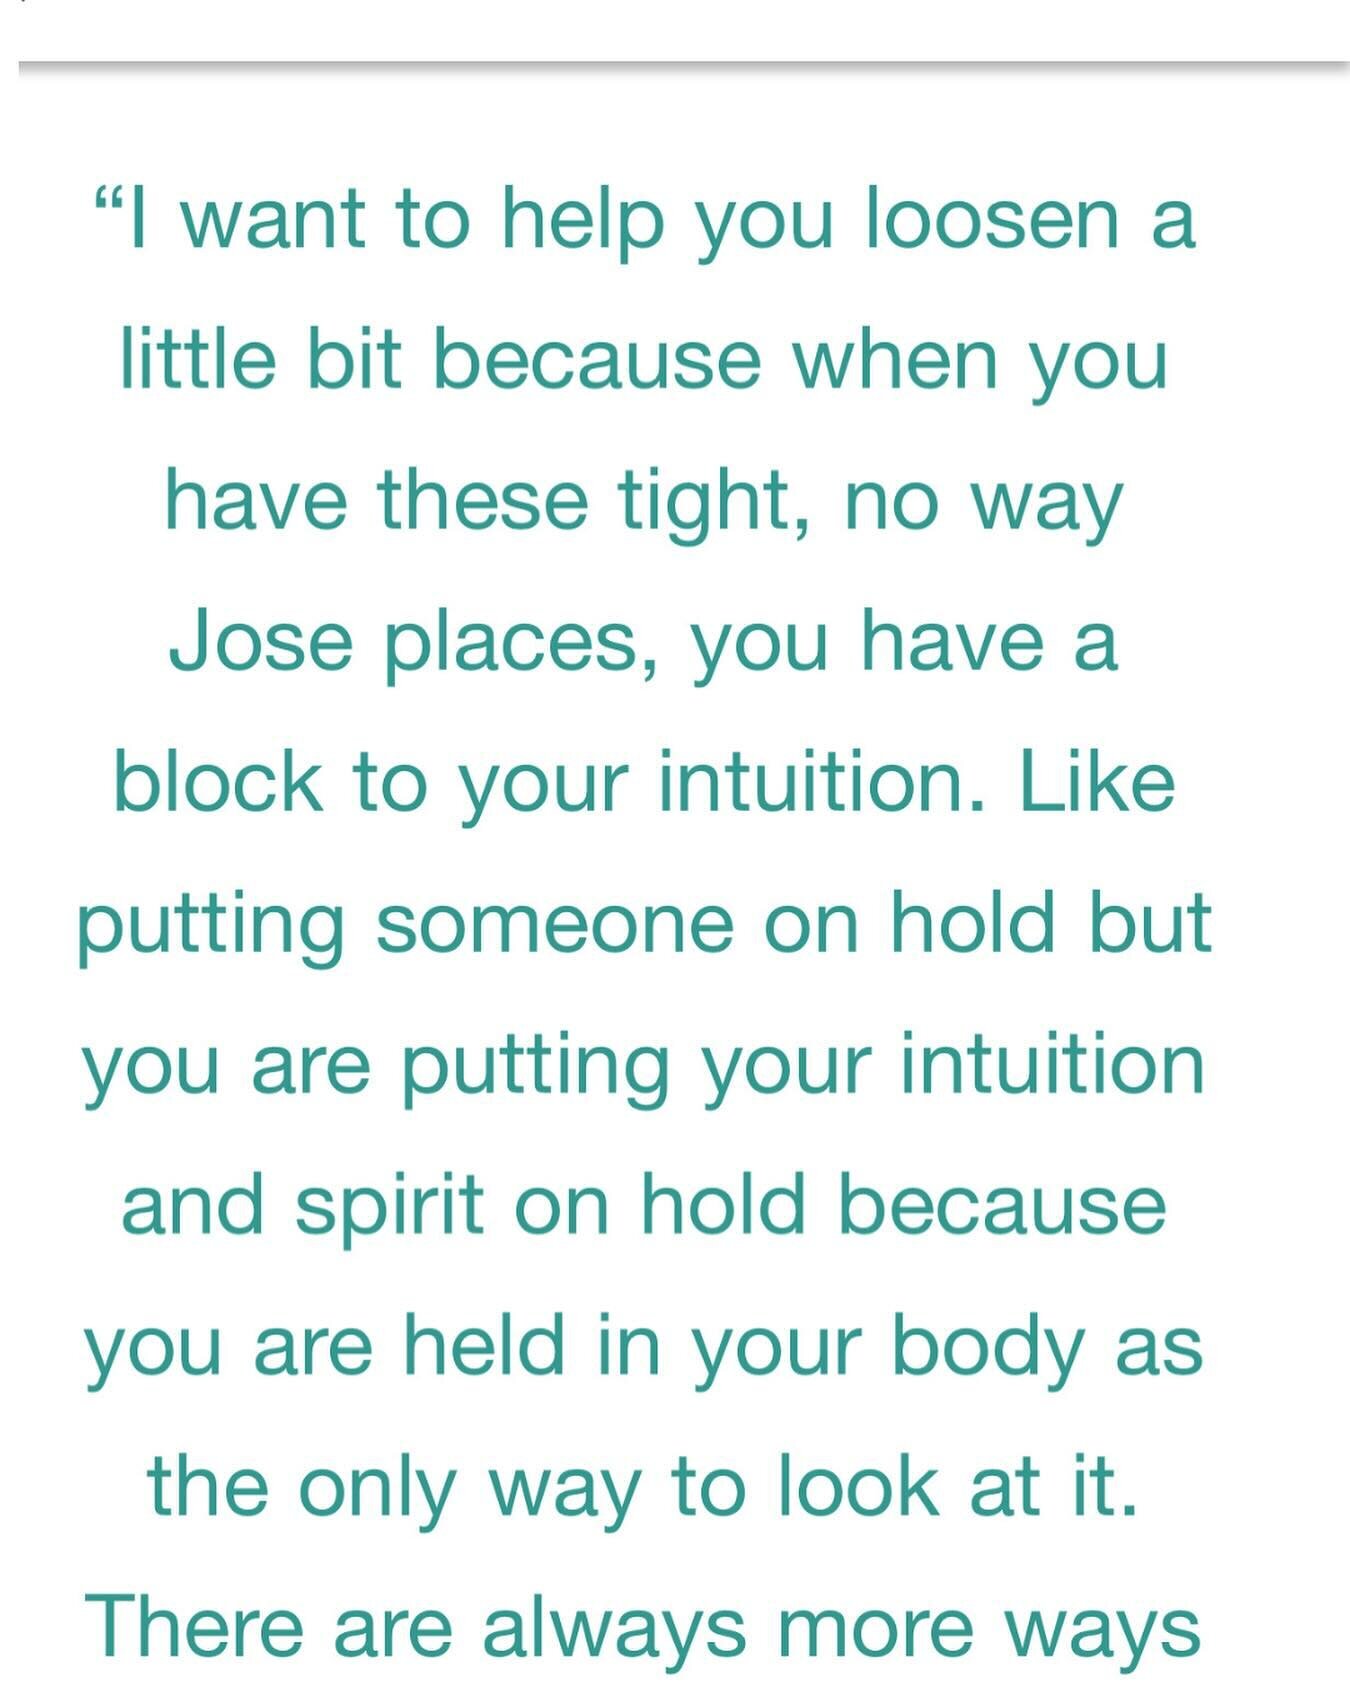 New TuneInward!
#followyourintuition
#intuitivehealing
#trustyourintuition
#oldwounds
#knowyourself
#embodiedhealing
#clearblockstointuition
#intuitionquotes